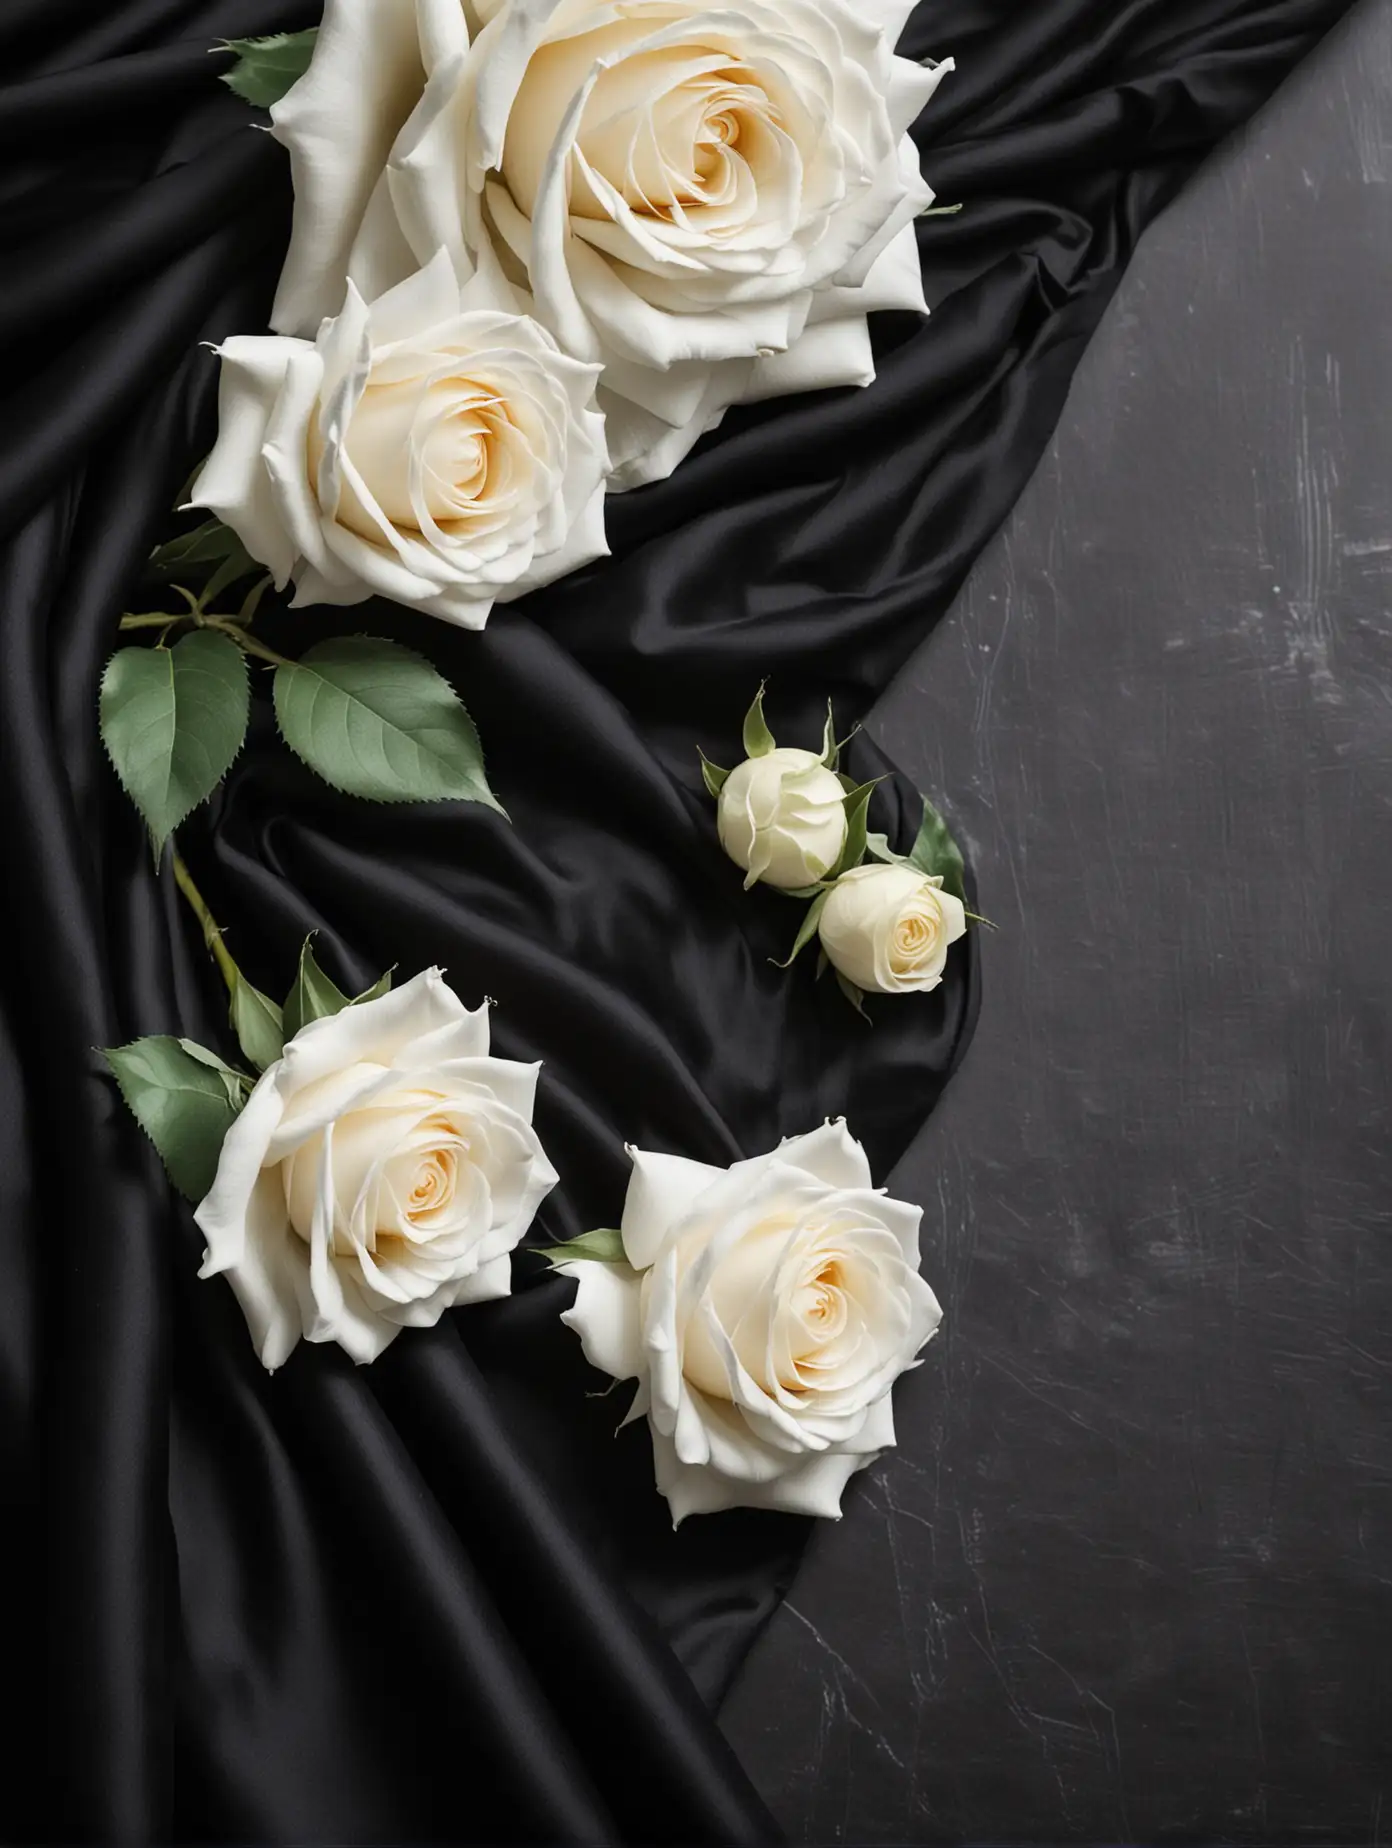 black draped fabric on the left side, on the fabric lies some beautiful white roses, large black solid background